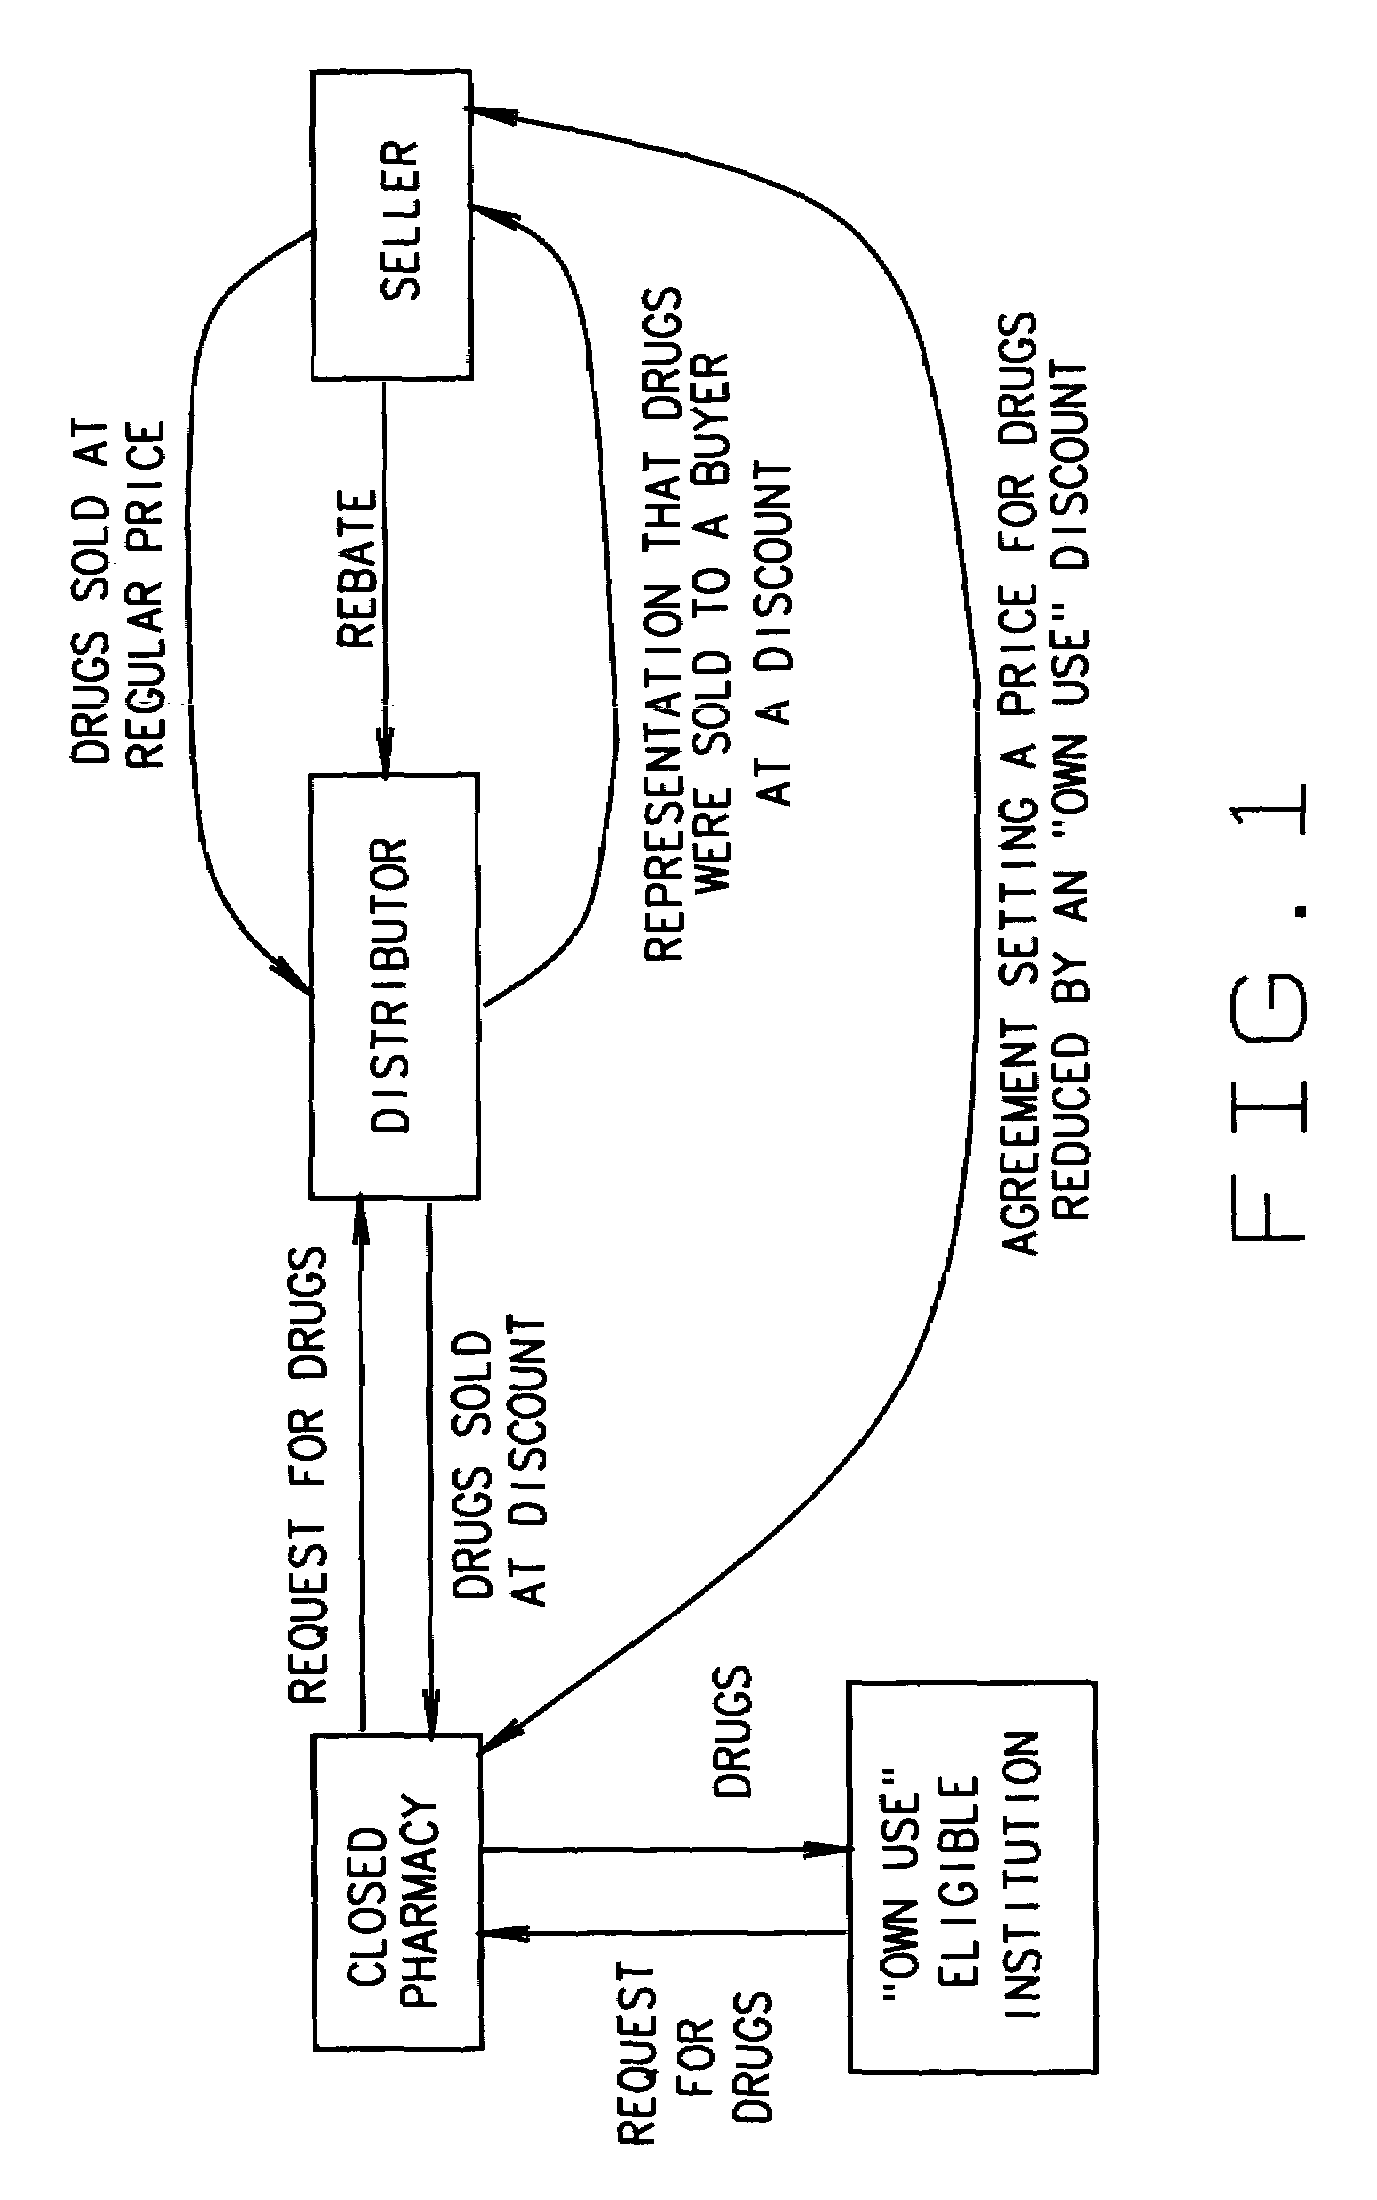 Method and apparatus for processing pharmaceutical orders to determine whether a buyer of pharmaceuticals qualifies for an "own use" discount